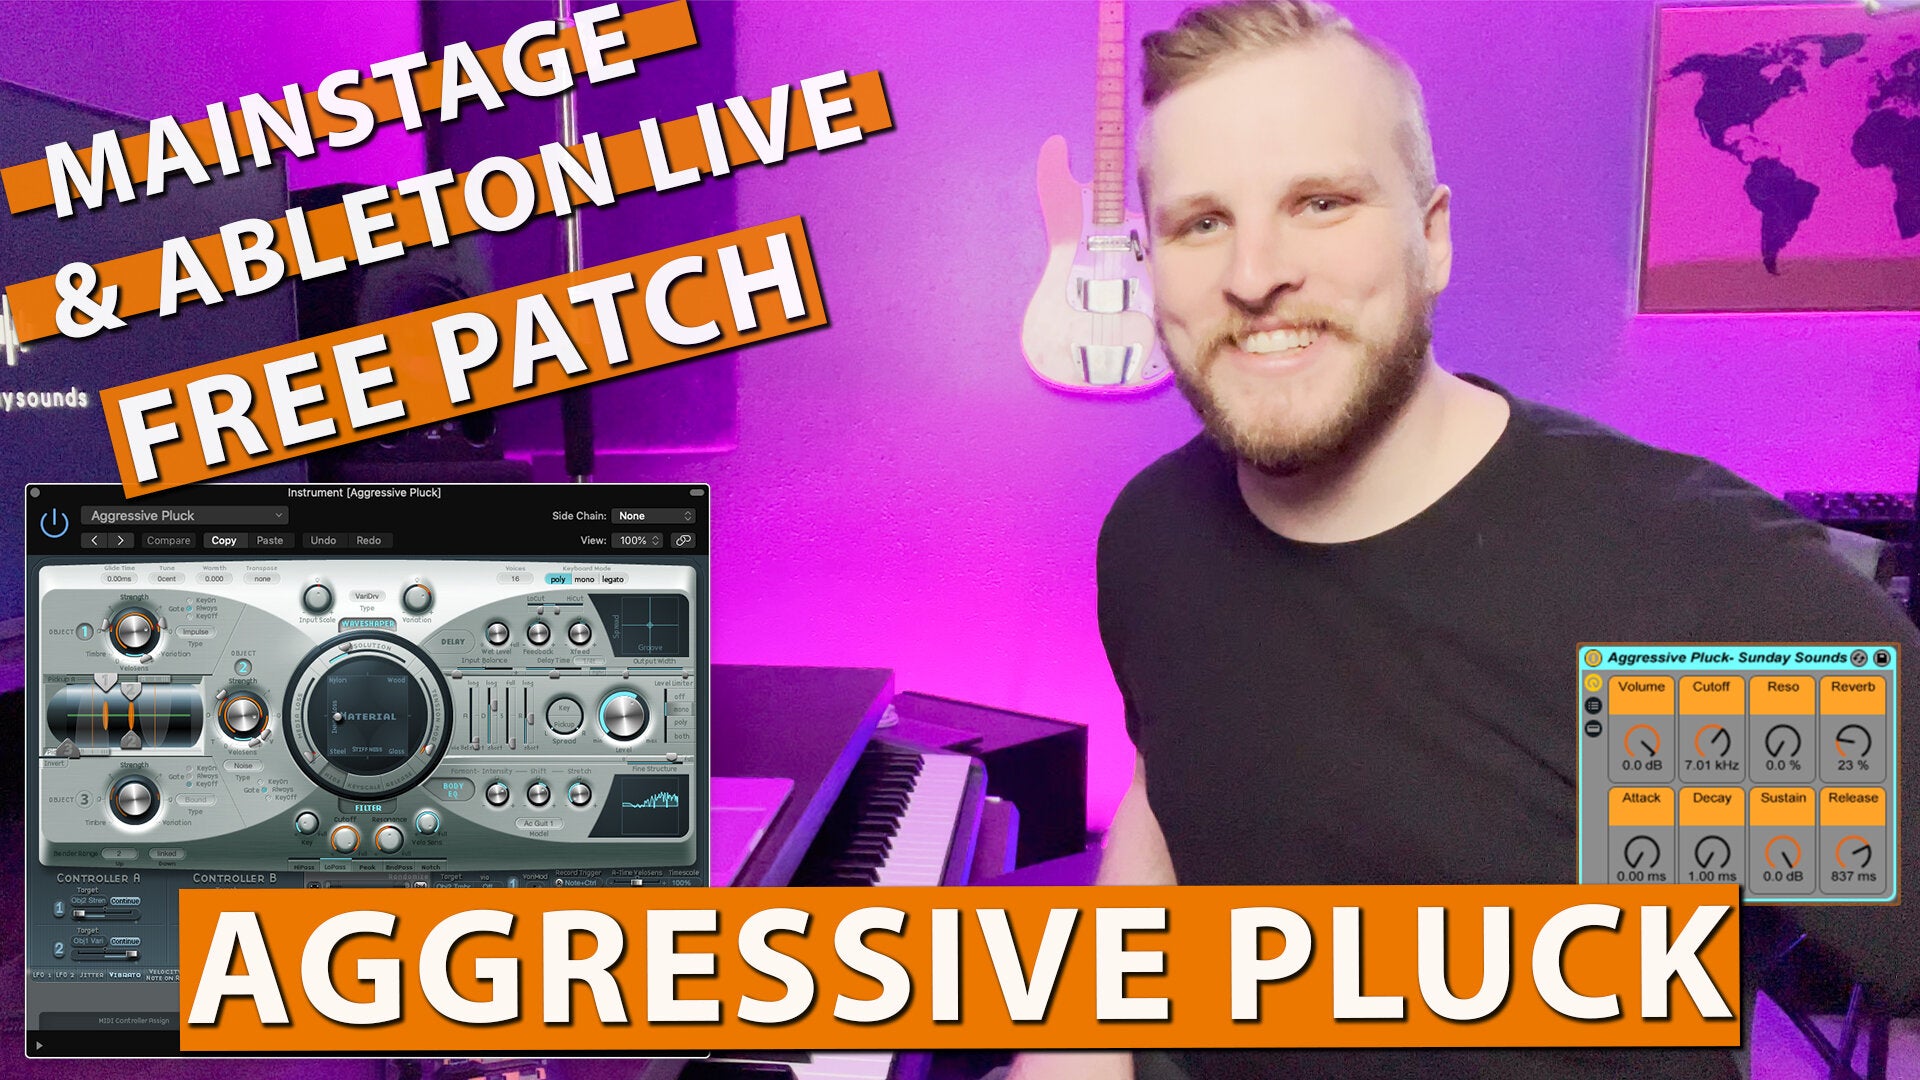 Free MainStage & Ableton Worship Patch! - Aggressive Pluck